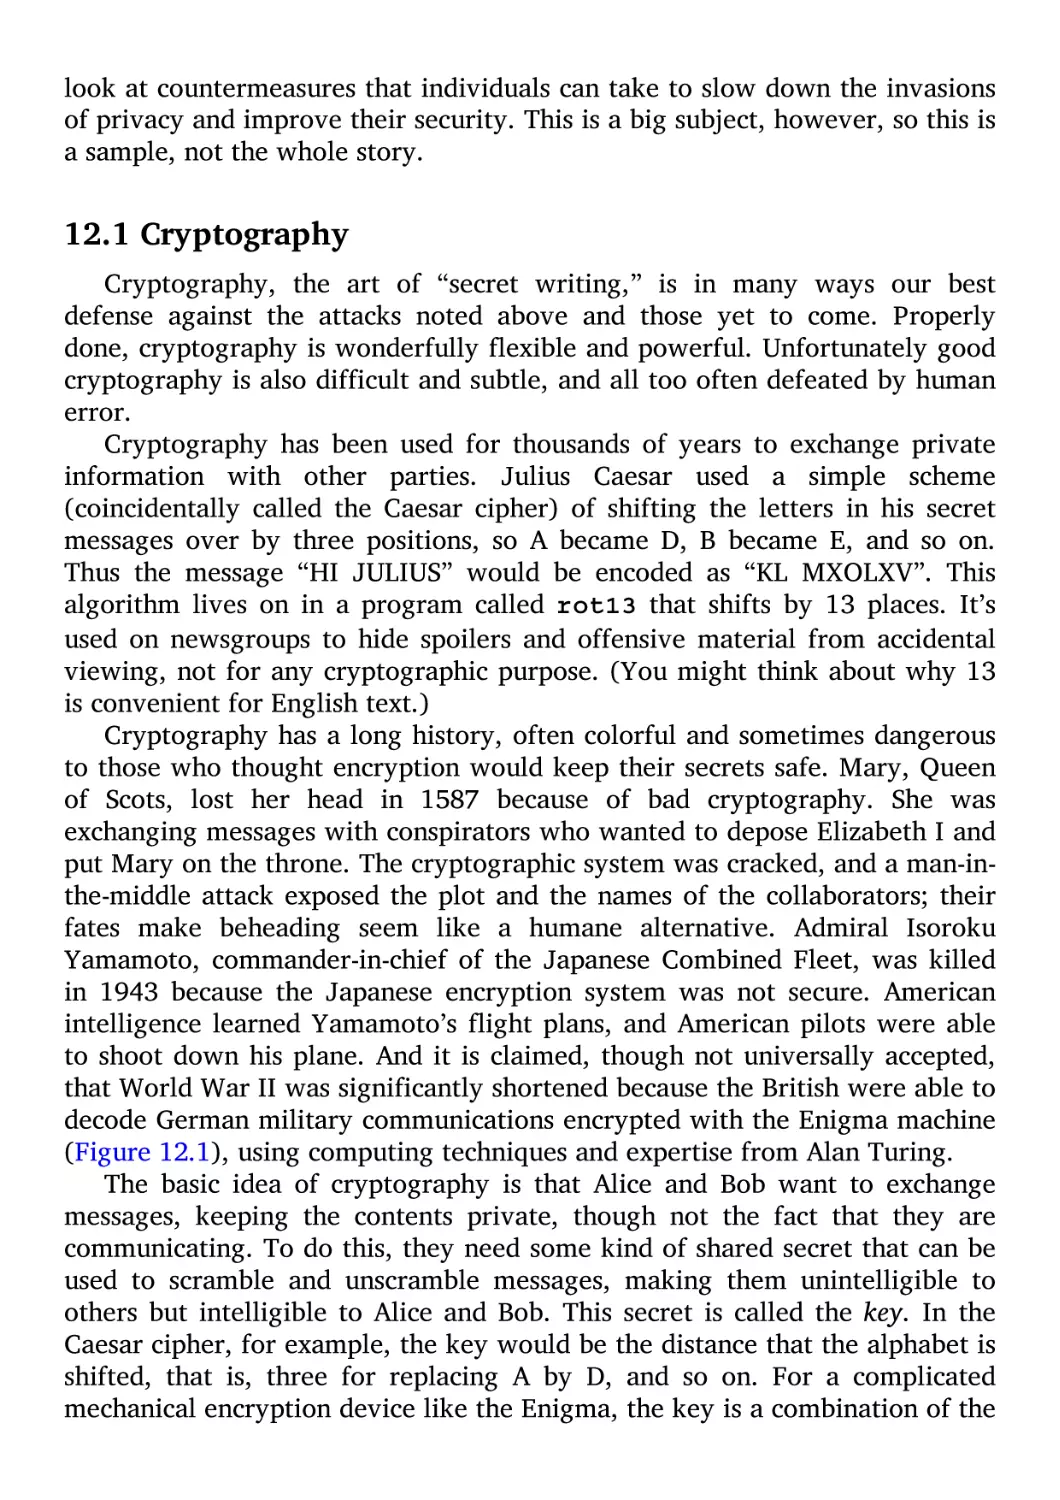 12.1 Cryptography